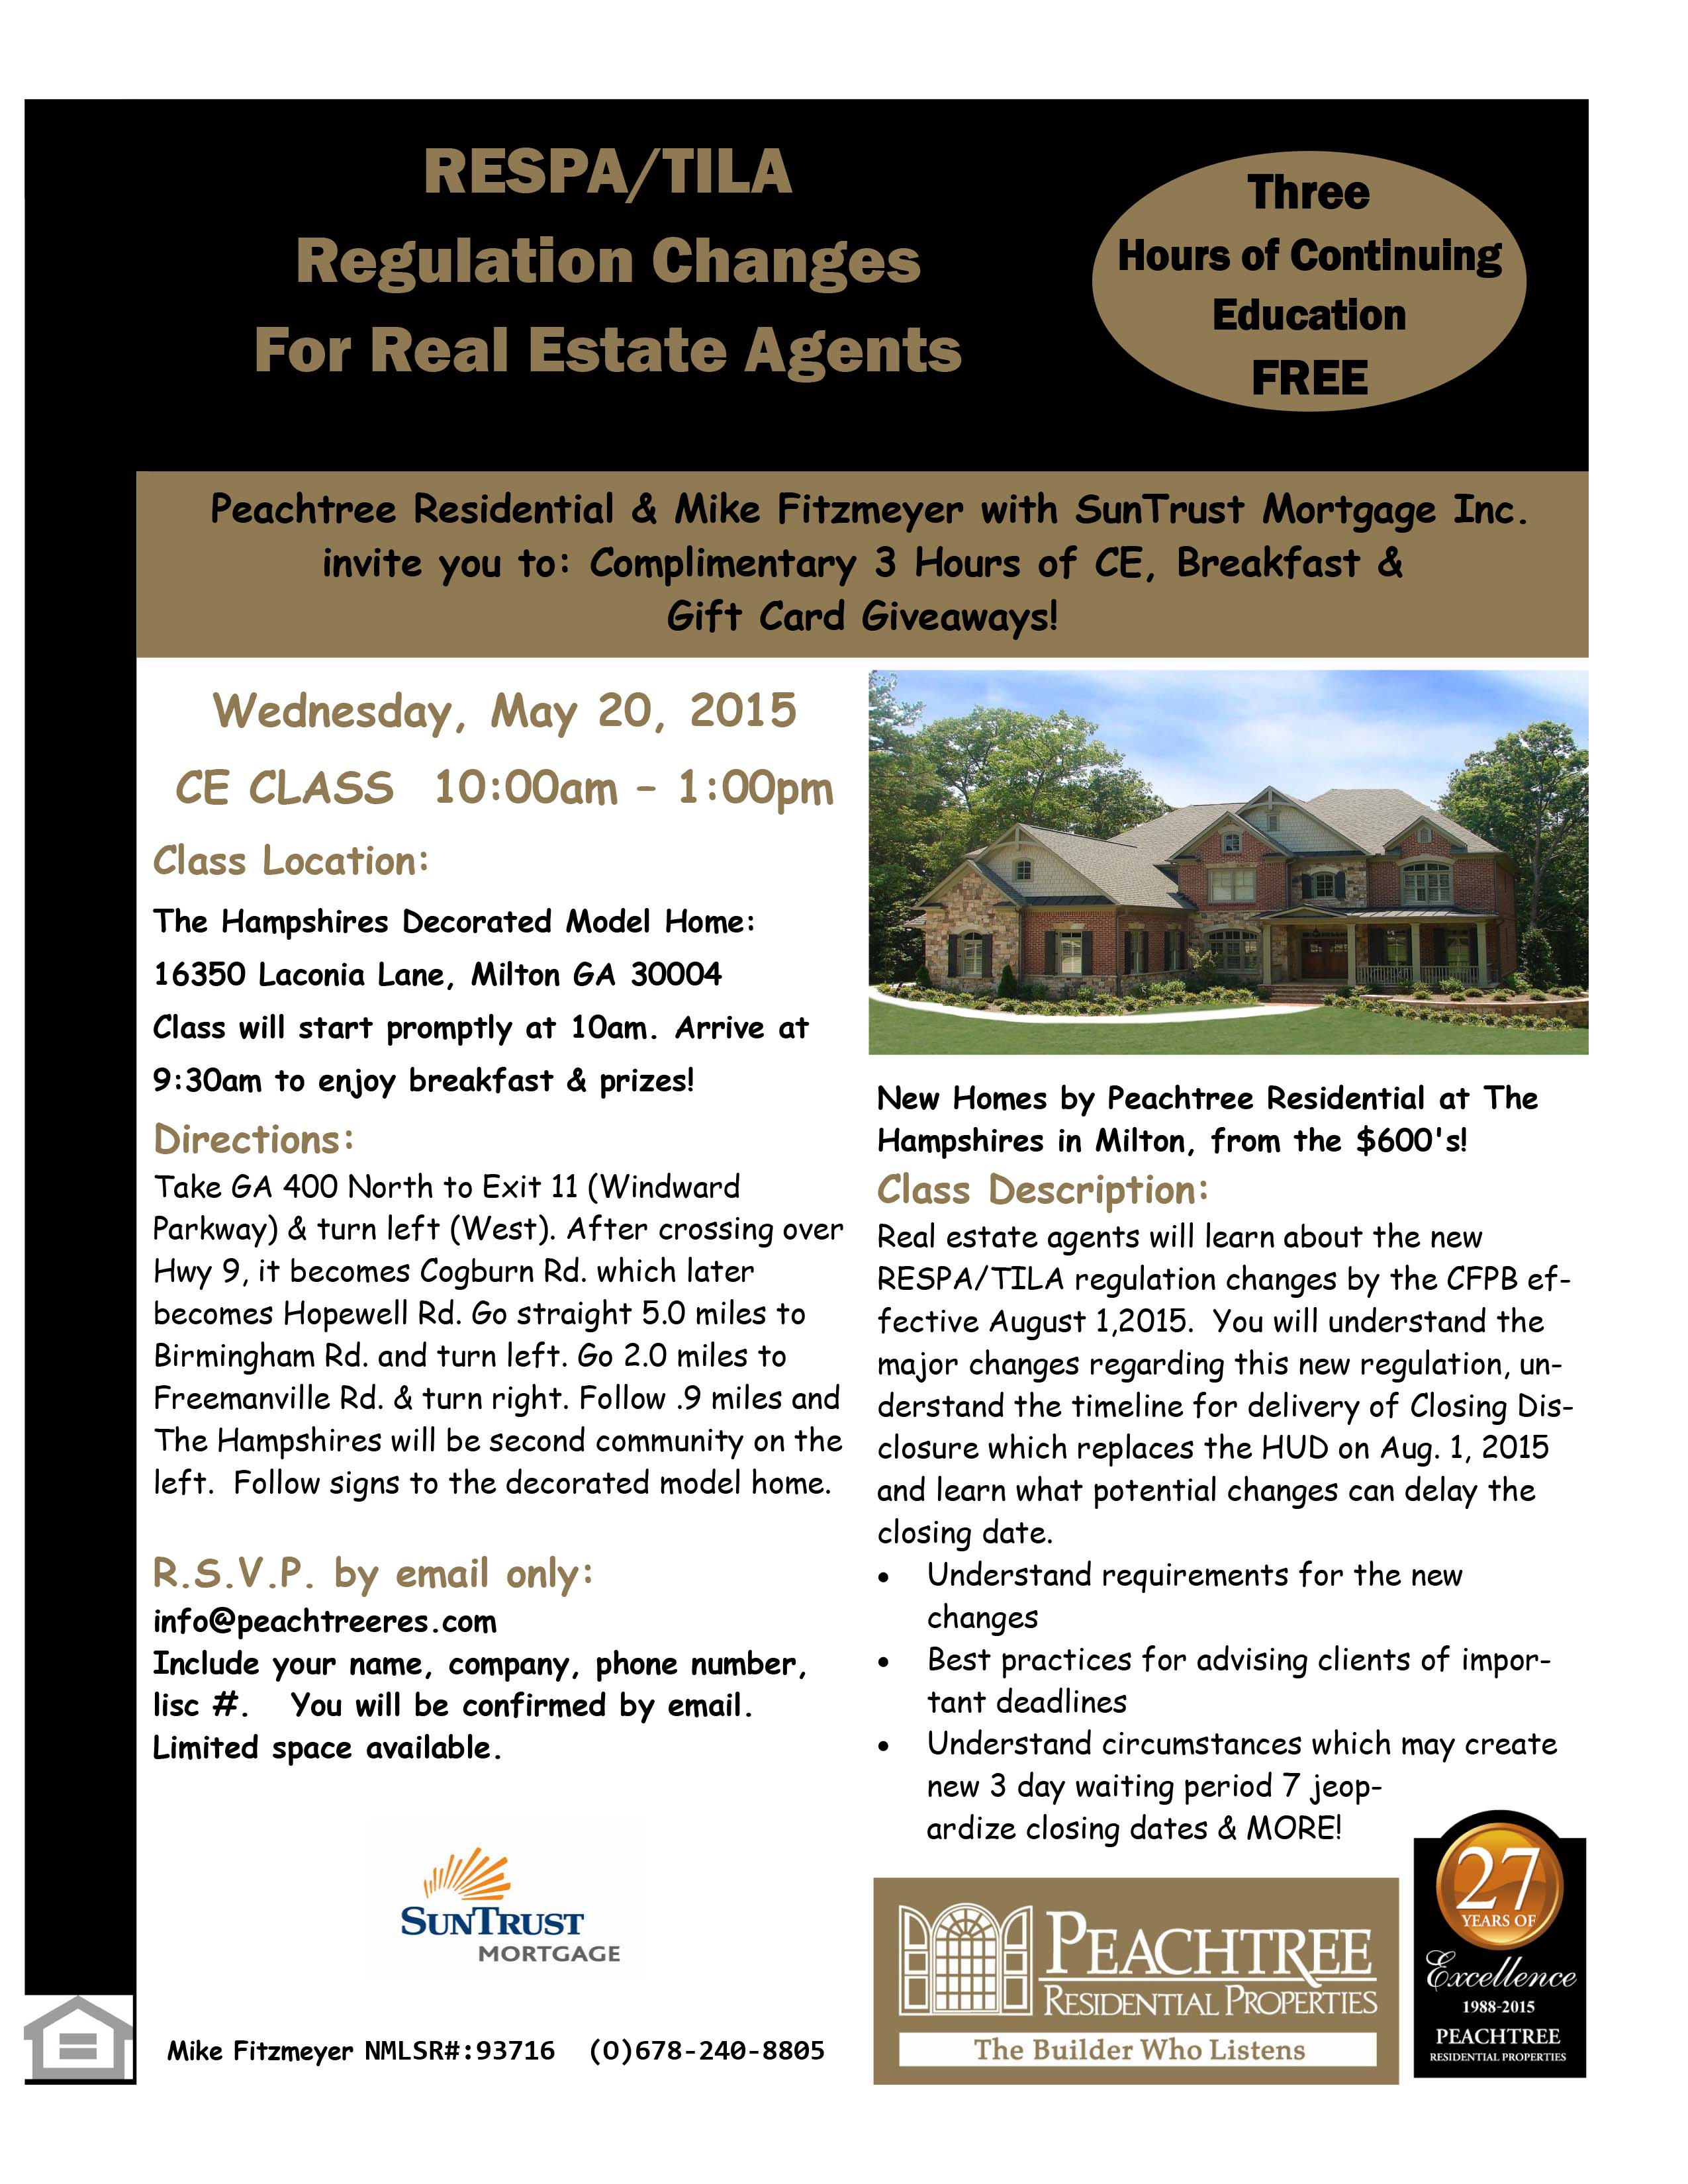 herberg duurzame grondstof vloot Peachtree Residential Hosting Free Continuing Education Class on May 20th -  Peachtree Residential